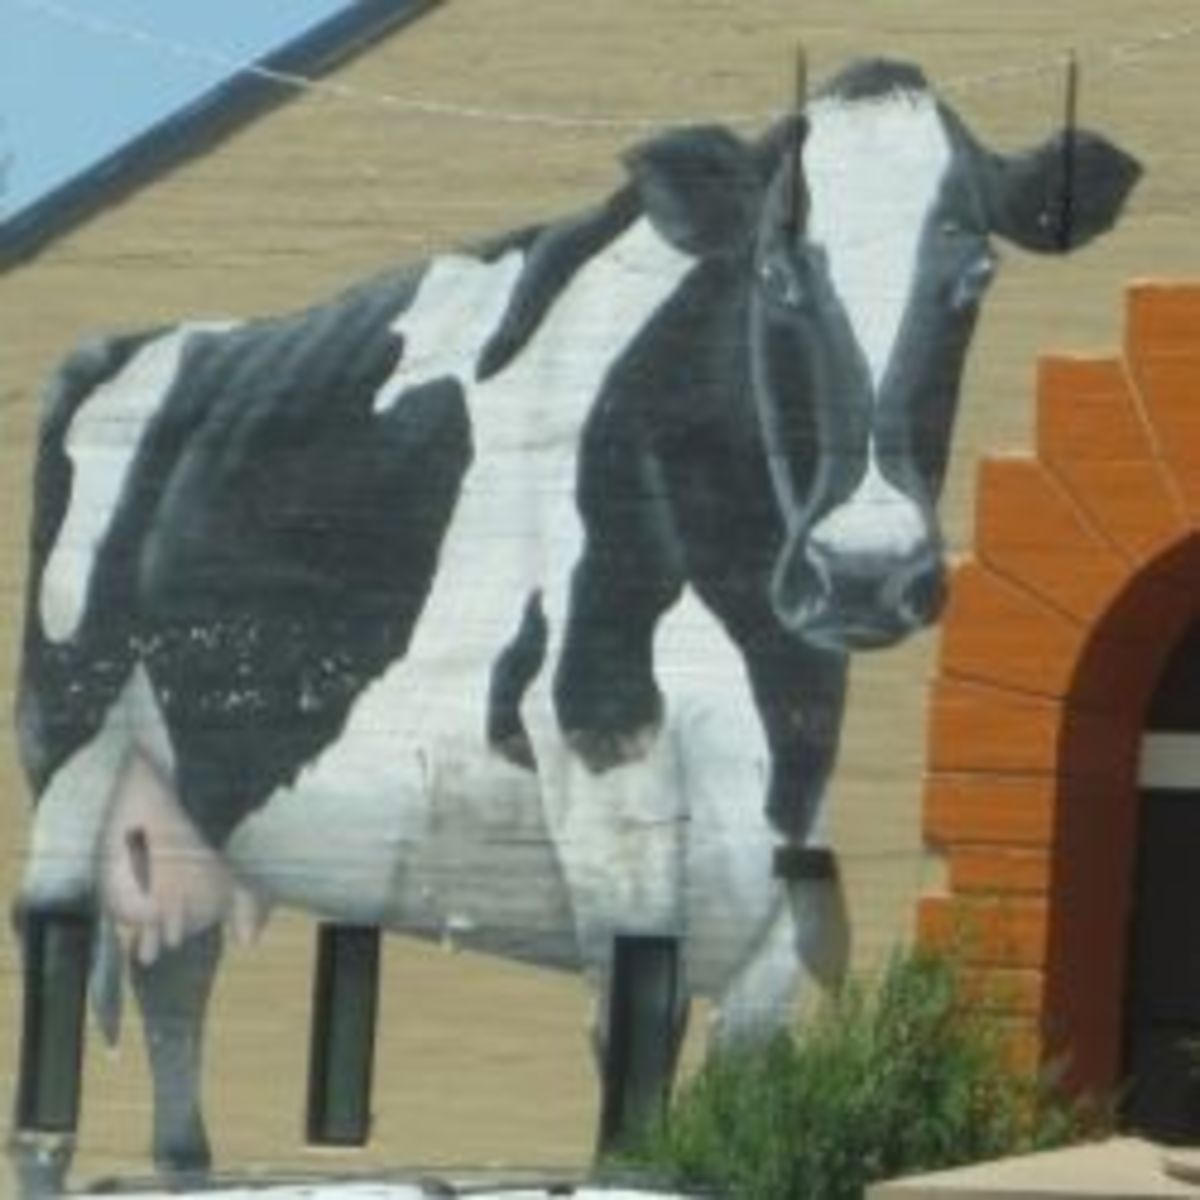 The Flagstaff Furniture Barn / Natural Grocers Big Cow Mural